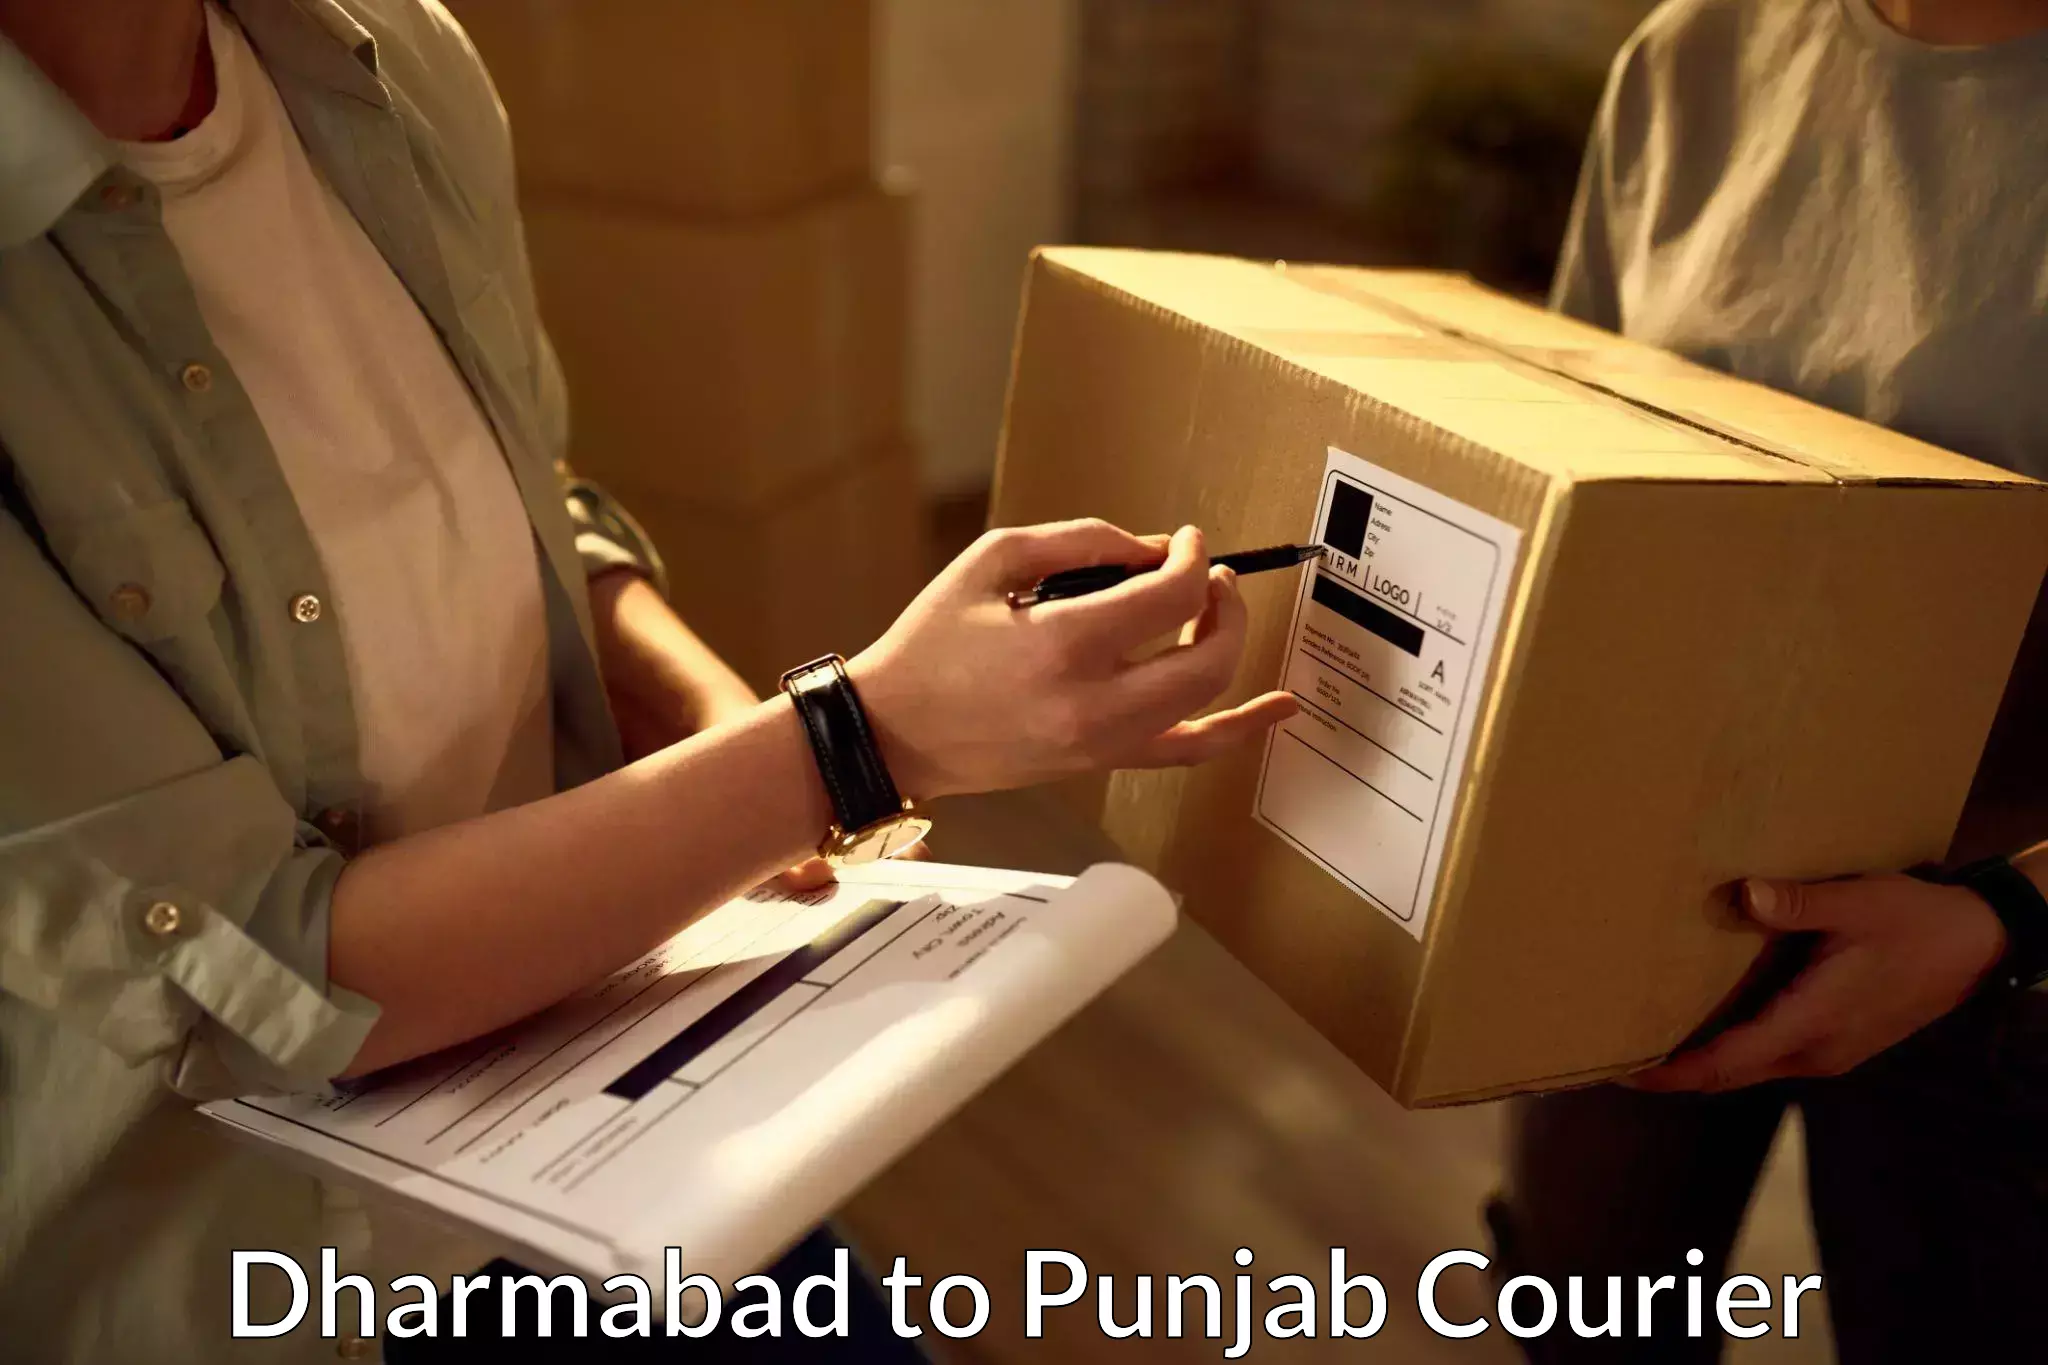 Courier service booking Dharmabad to Abohar